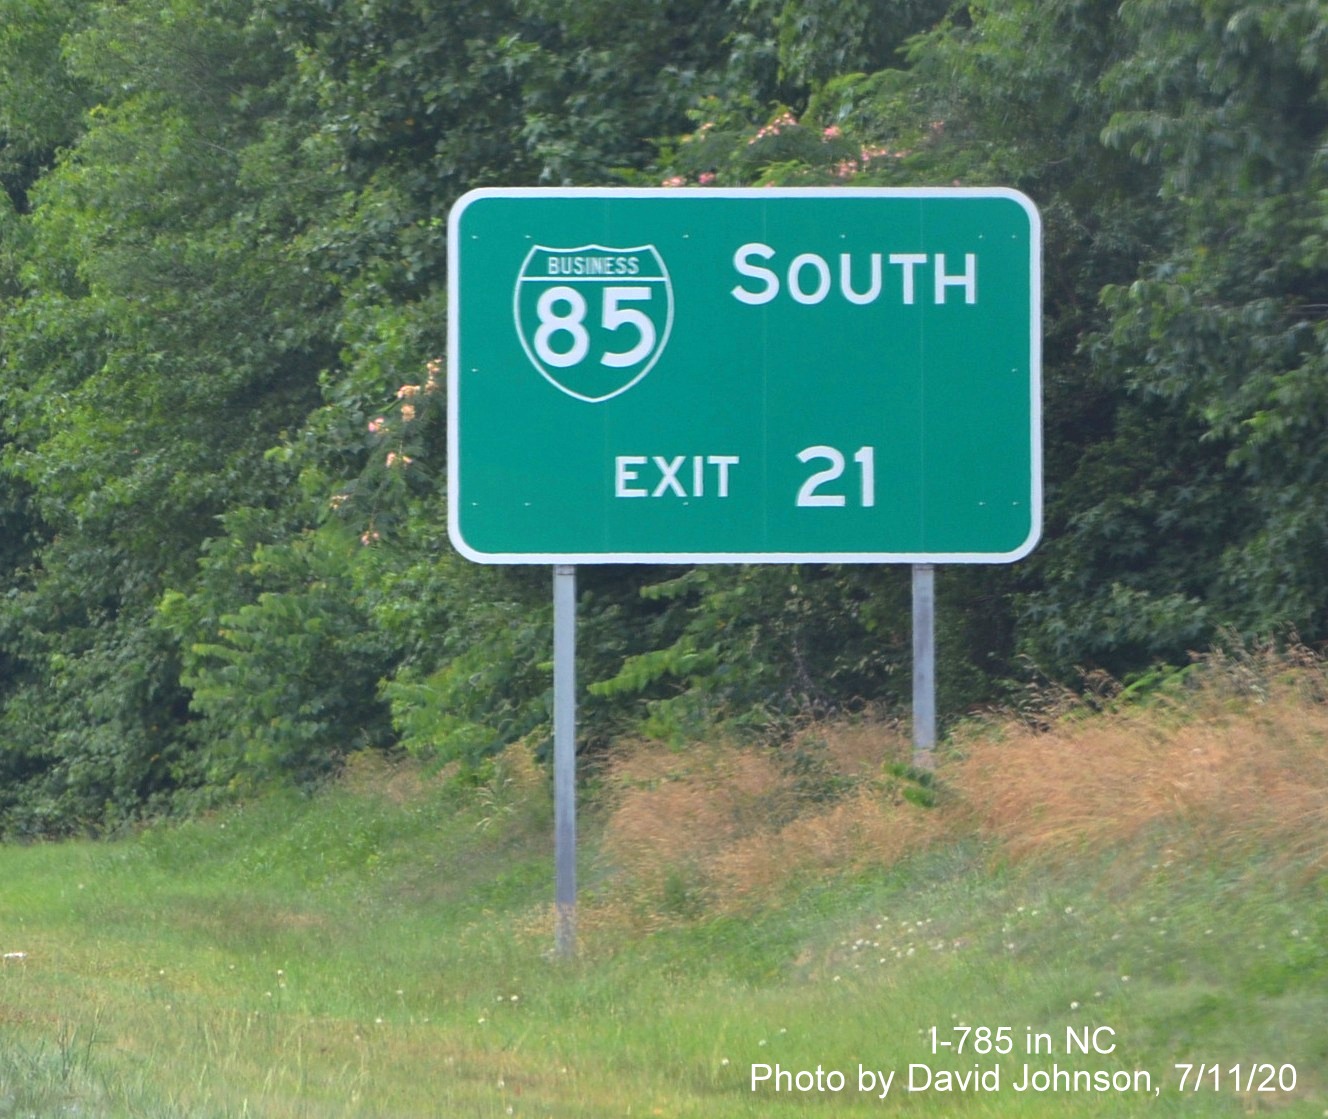 Image of auxiliary sign for Business 85 South prior to end of I-785 South Greensboro Urban Loop at I-40/I-85 interchange, by David Johnson July 2020